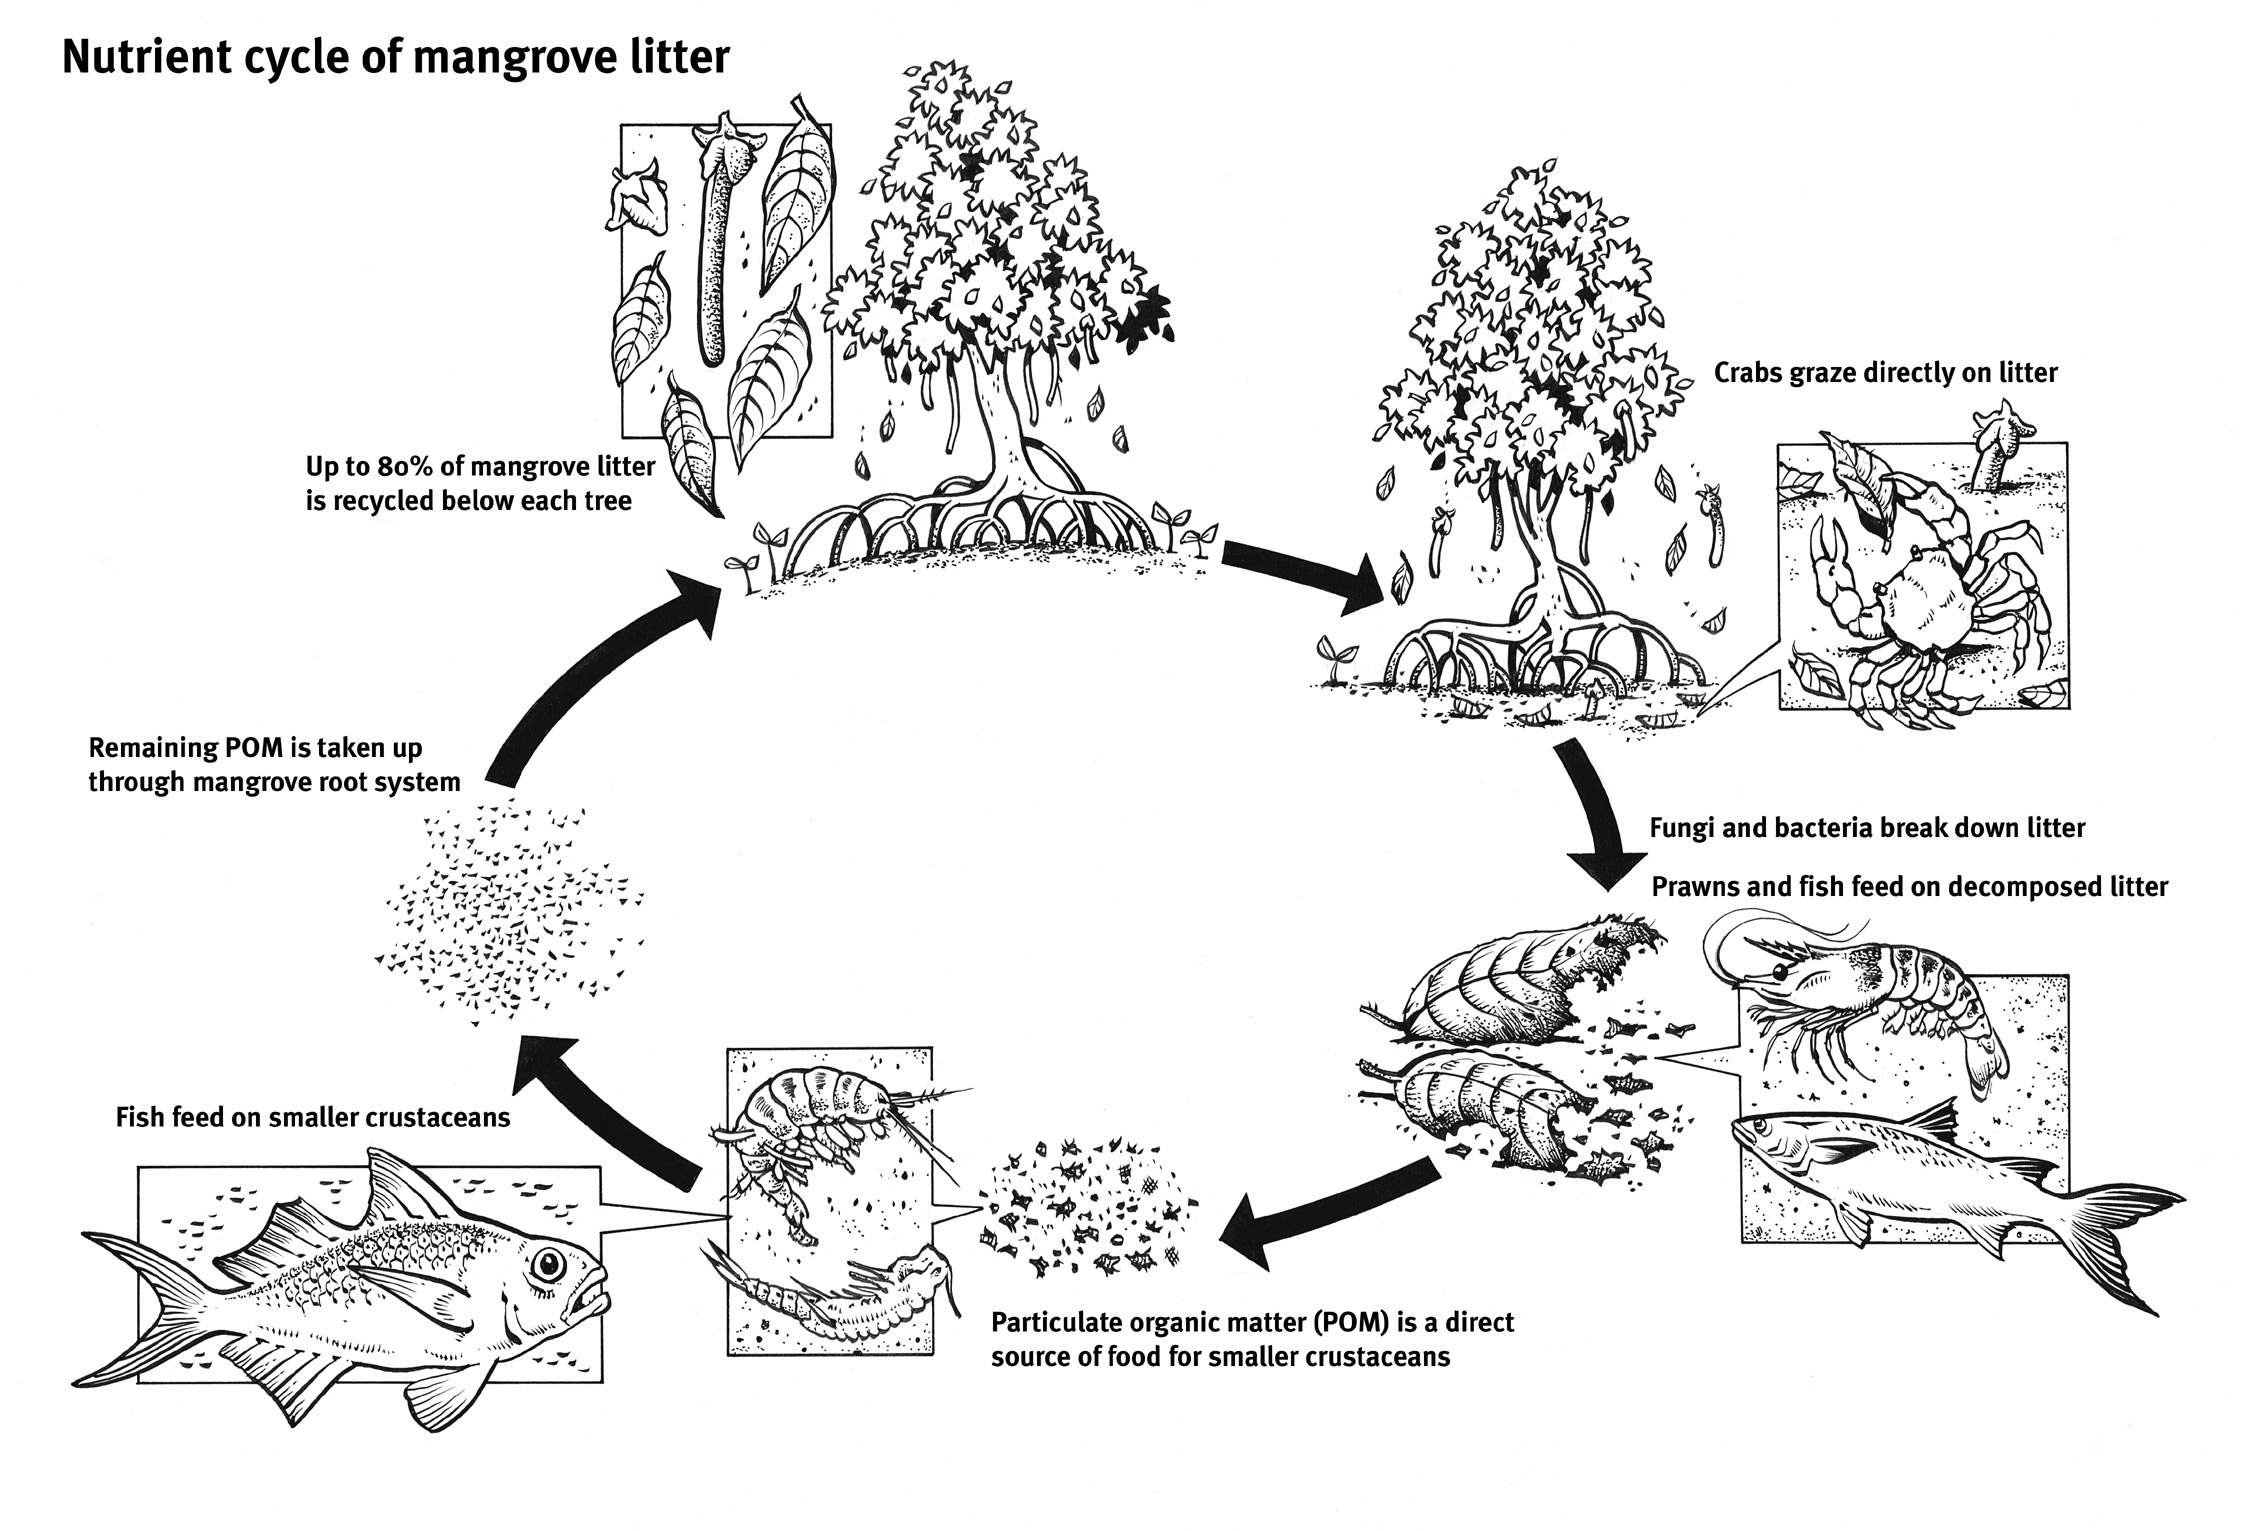 Marine plant material forms part of the nutrient cycle contributing to fisheries production